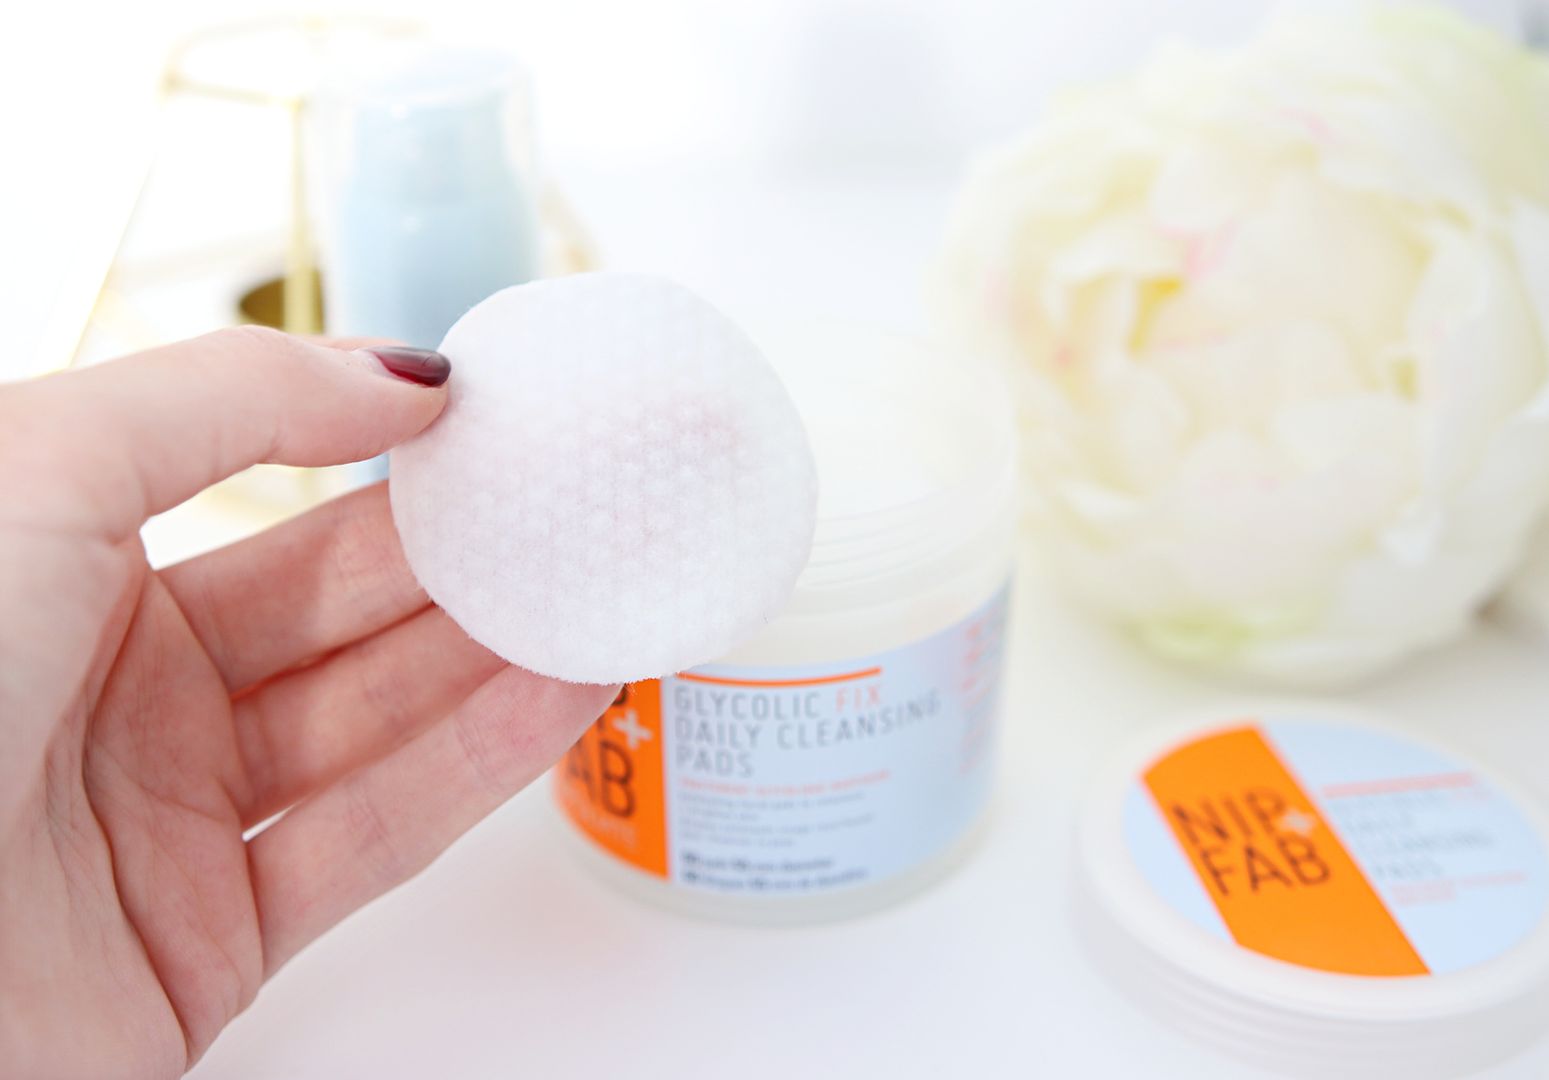 Nip & Fab Glycolic Fox Exfoliating Cleansing Pads Review